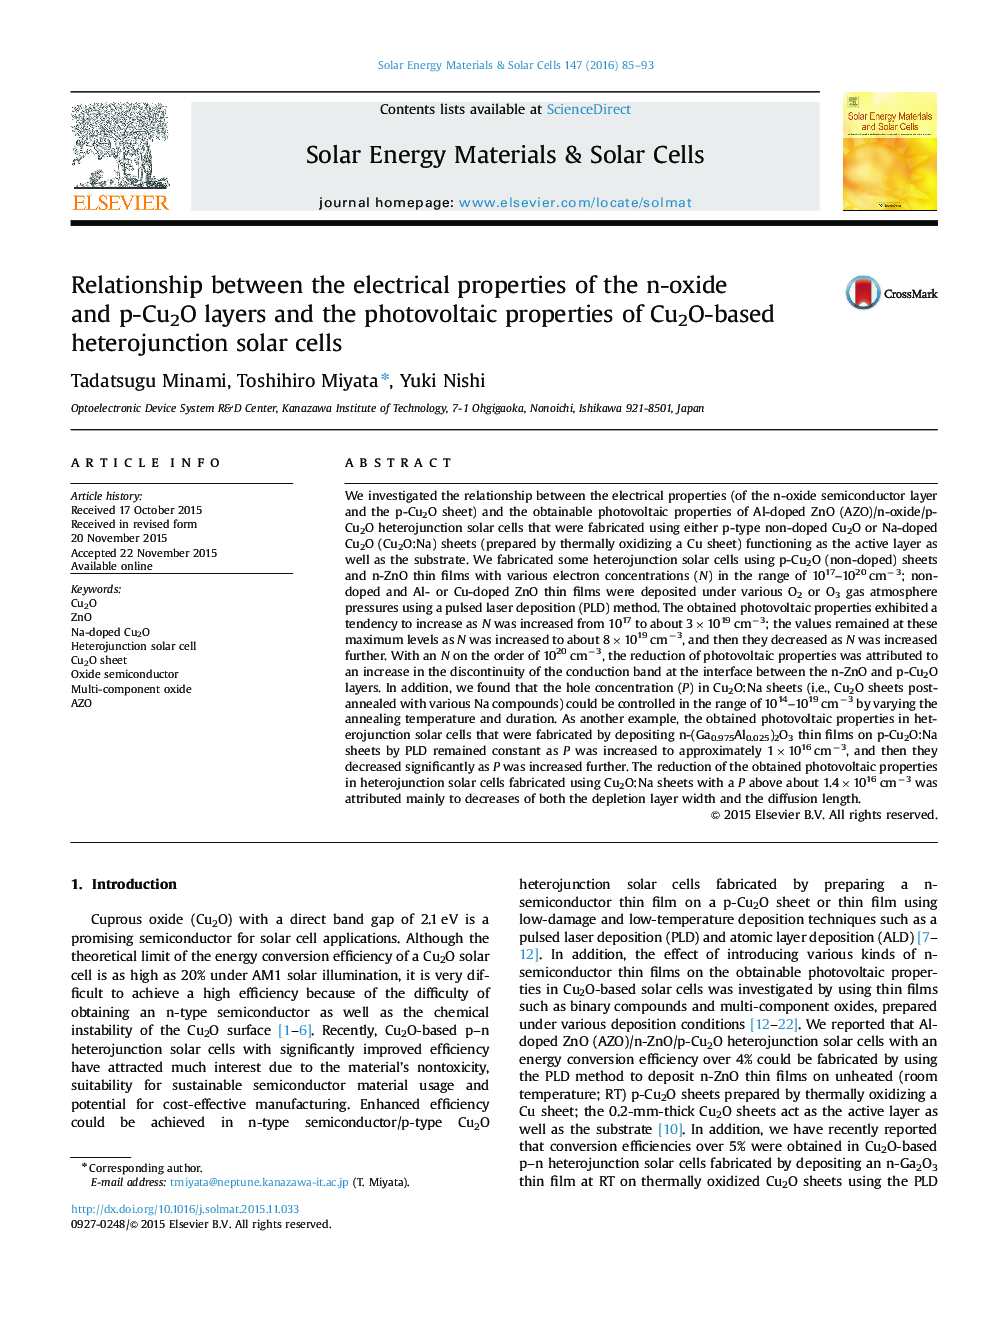 Relationship between the electrical properties of the n-oxide and p-Cu2O layers and the photovoltaic properties of Cu2O-based heterojunction solar cells